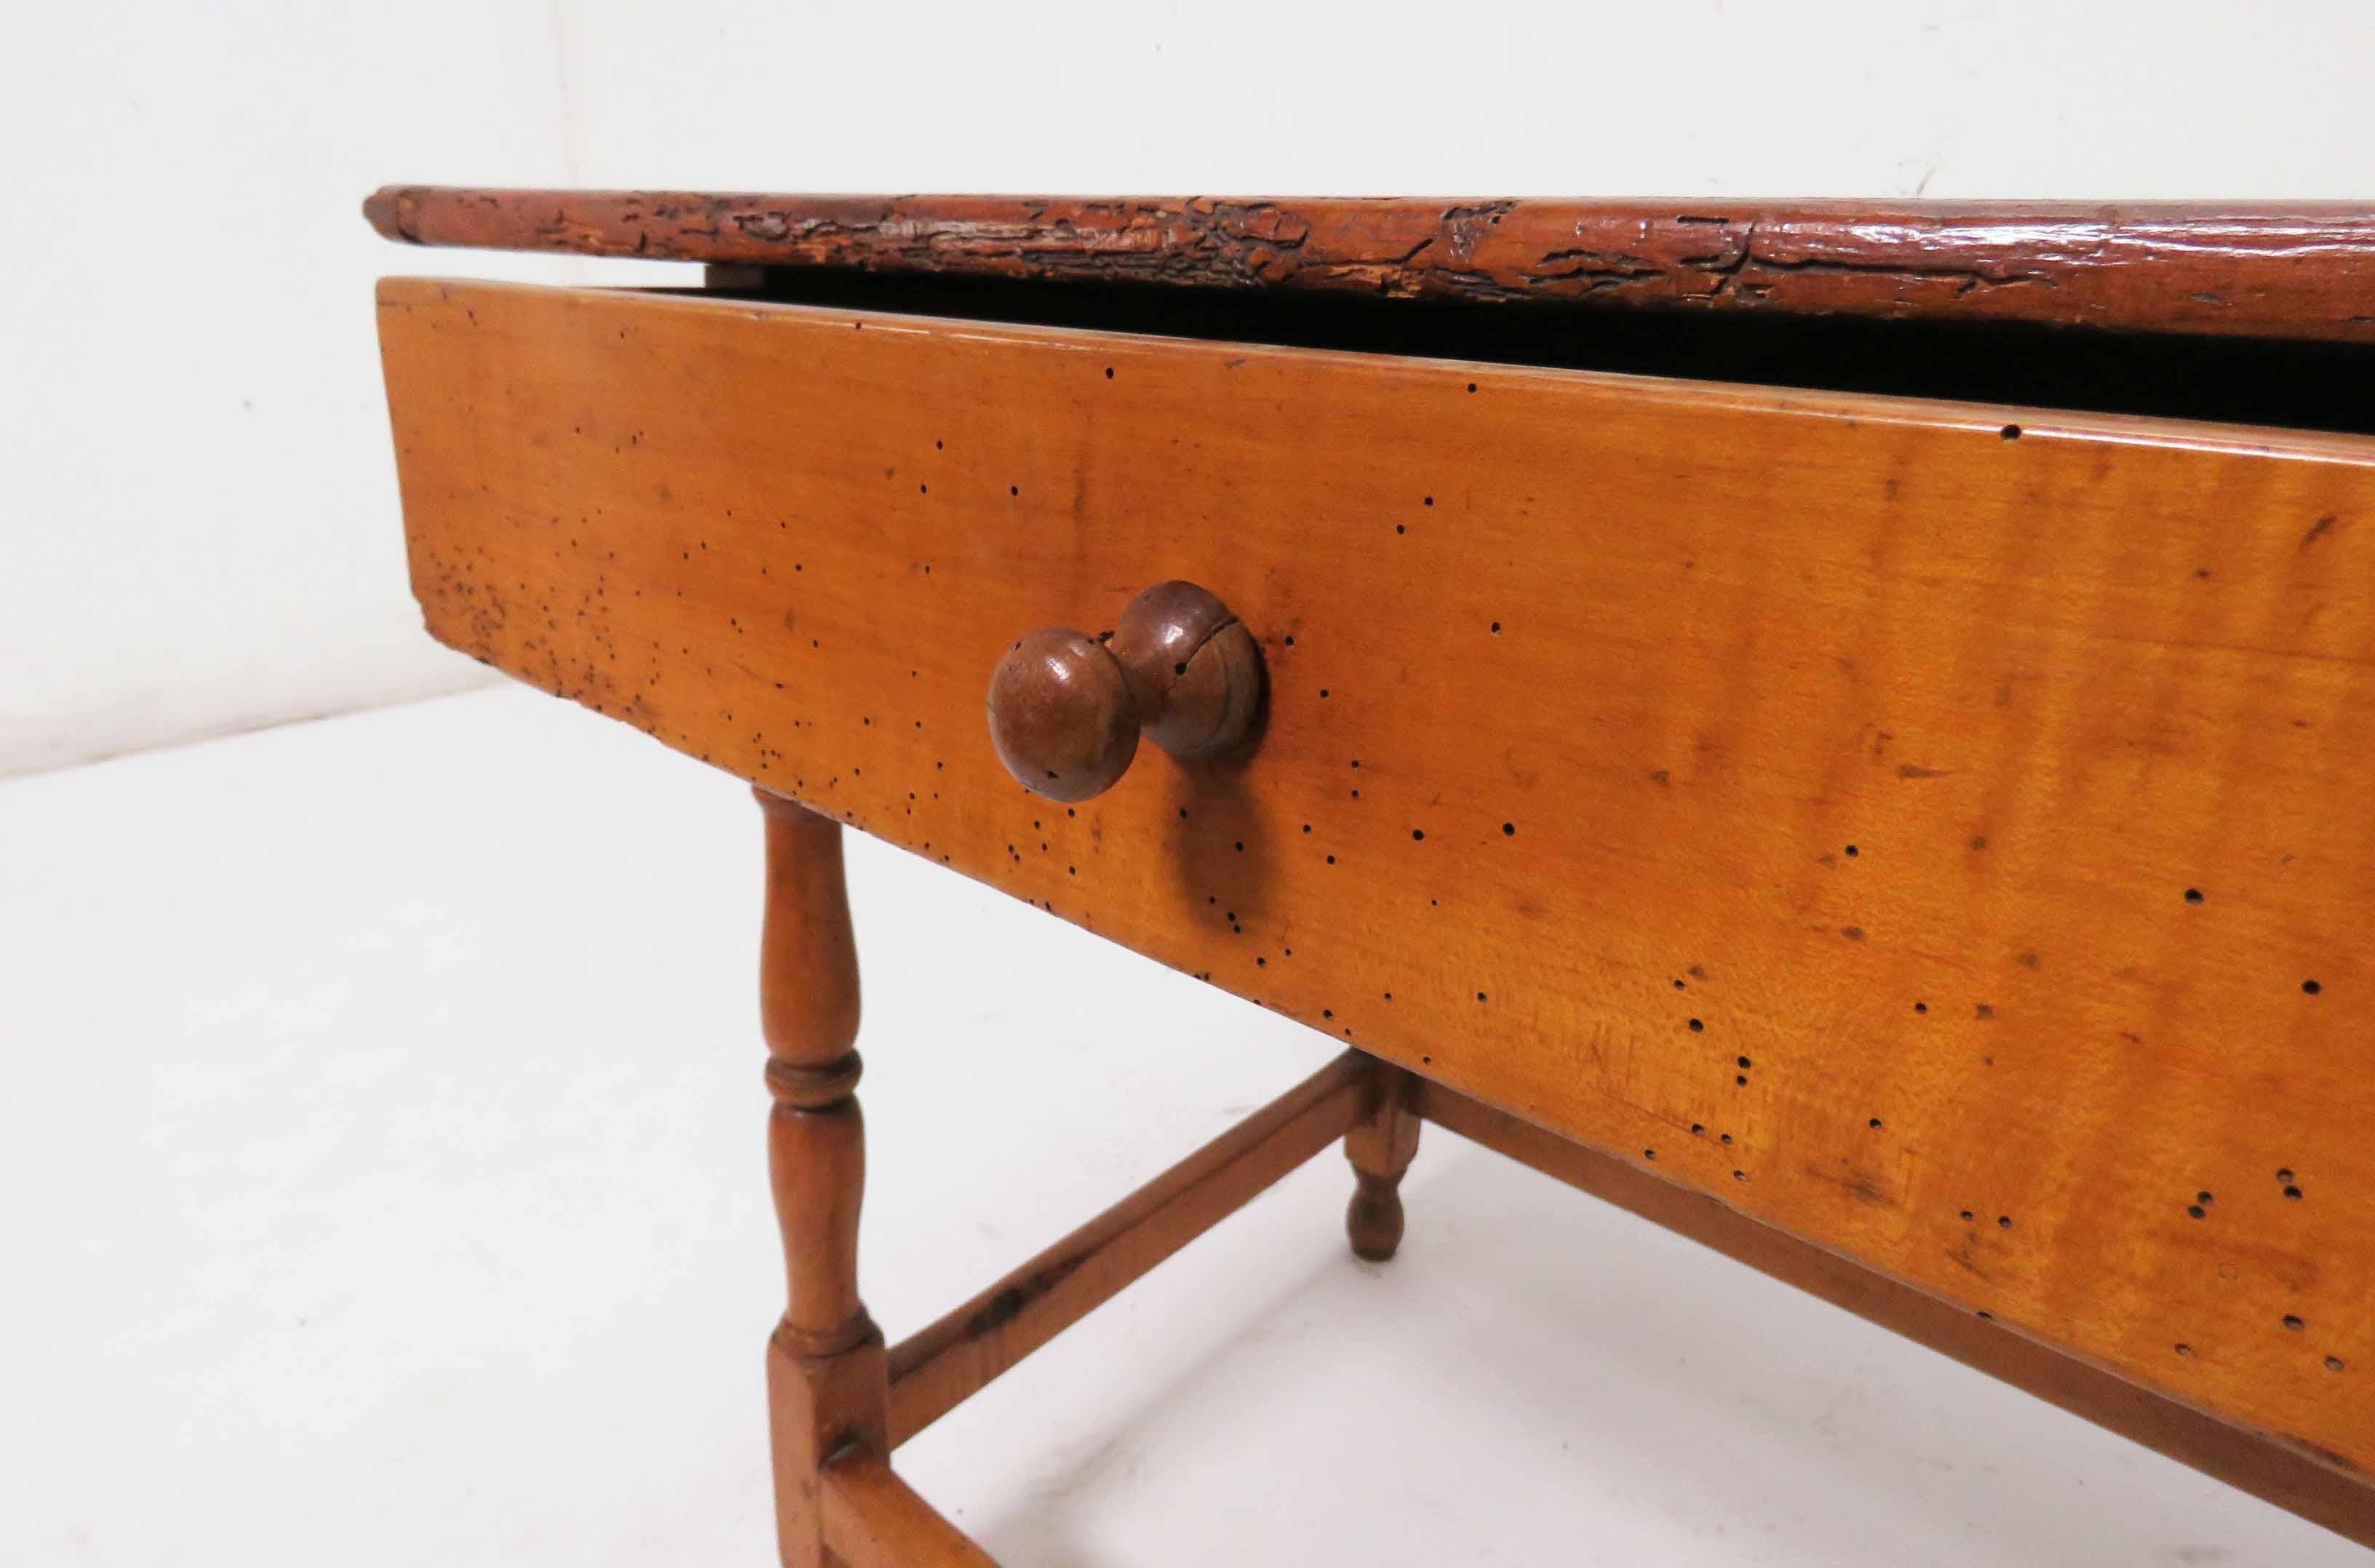 Primitive 18th Century Antique American Tavern Table with Breadboard Top